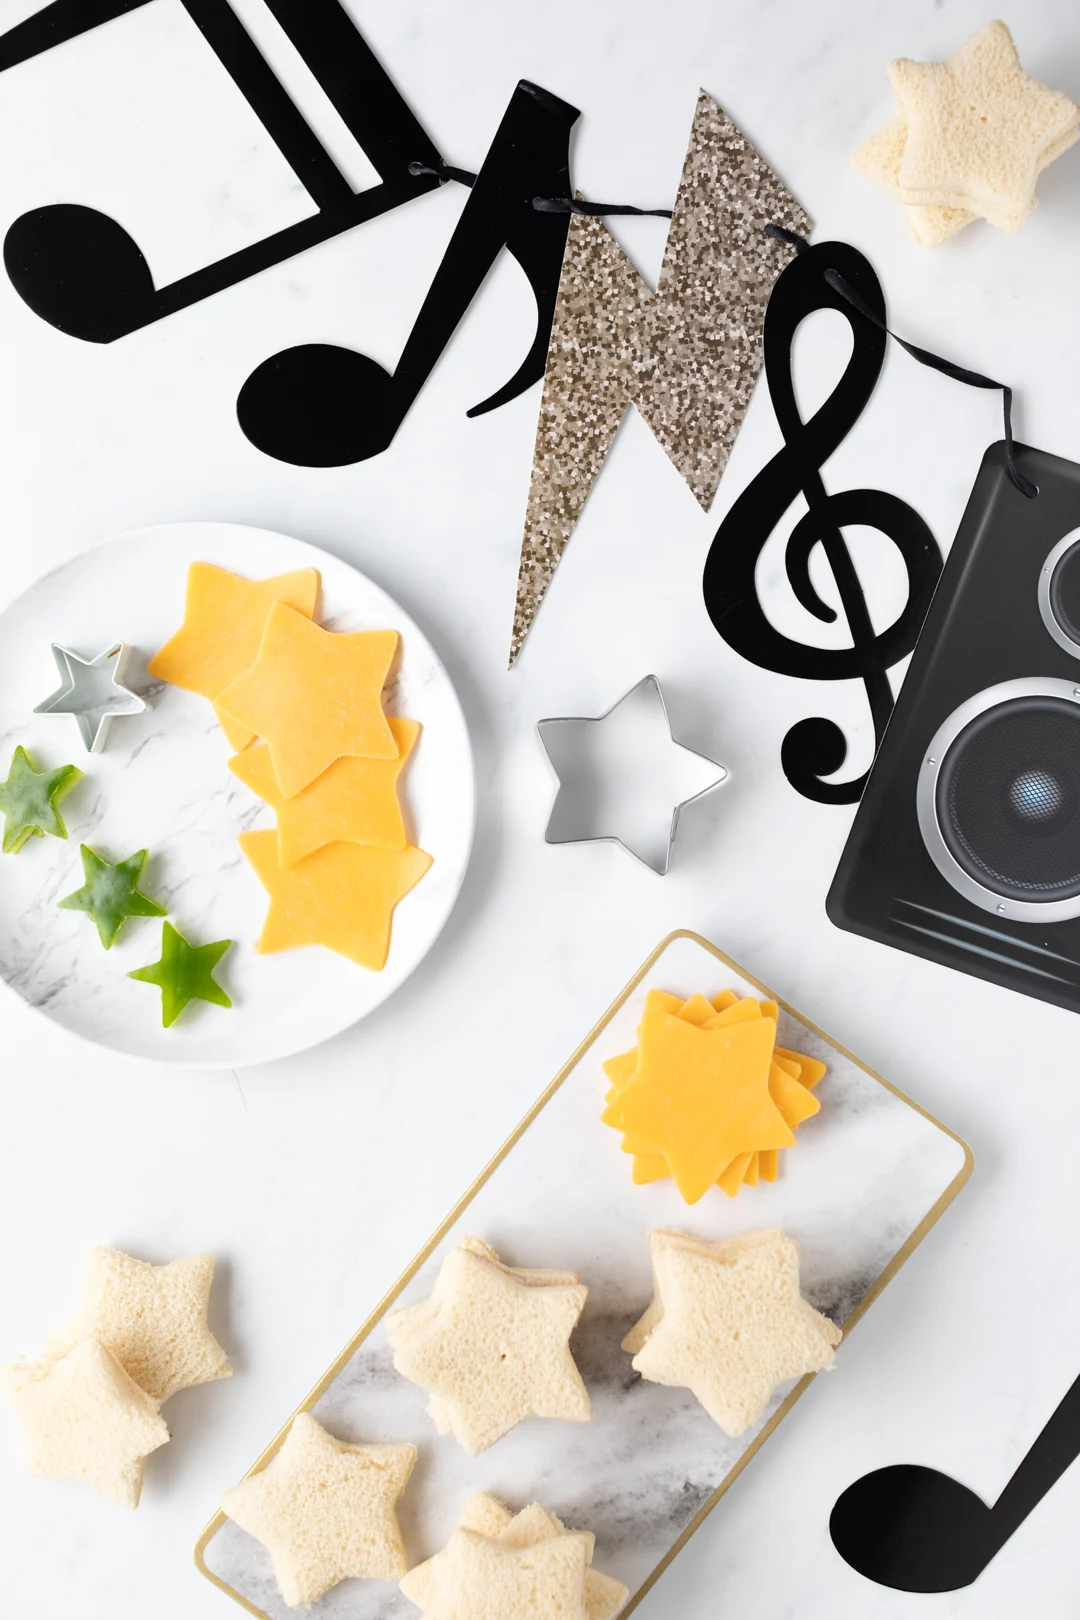 star shaped sandwich fixings and rock star party decorations